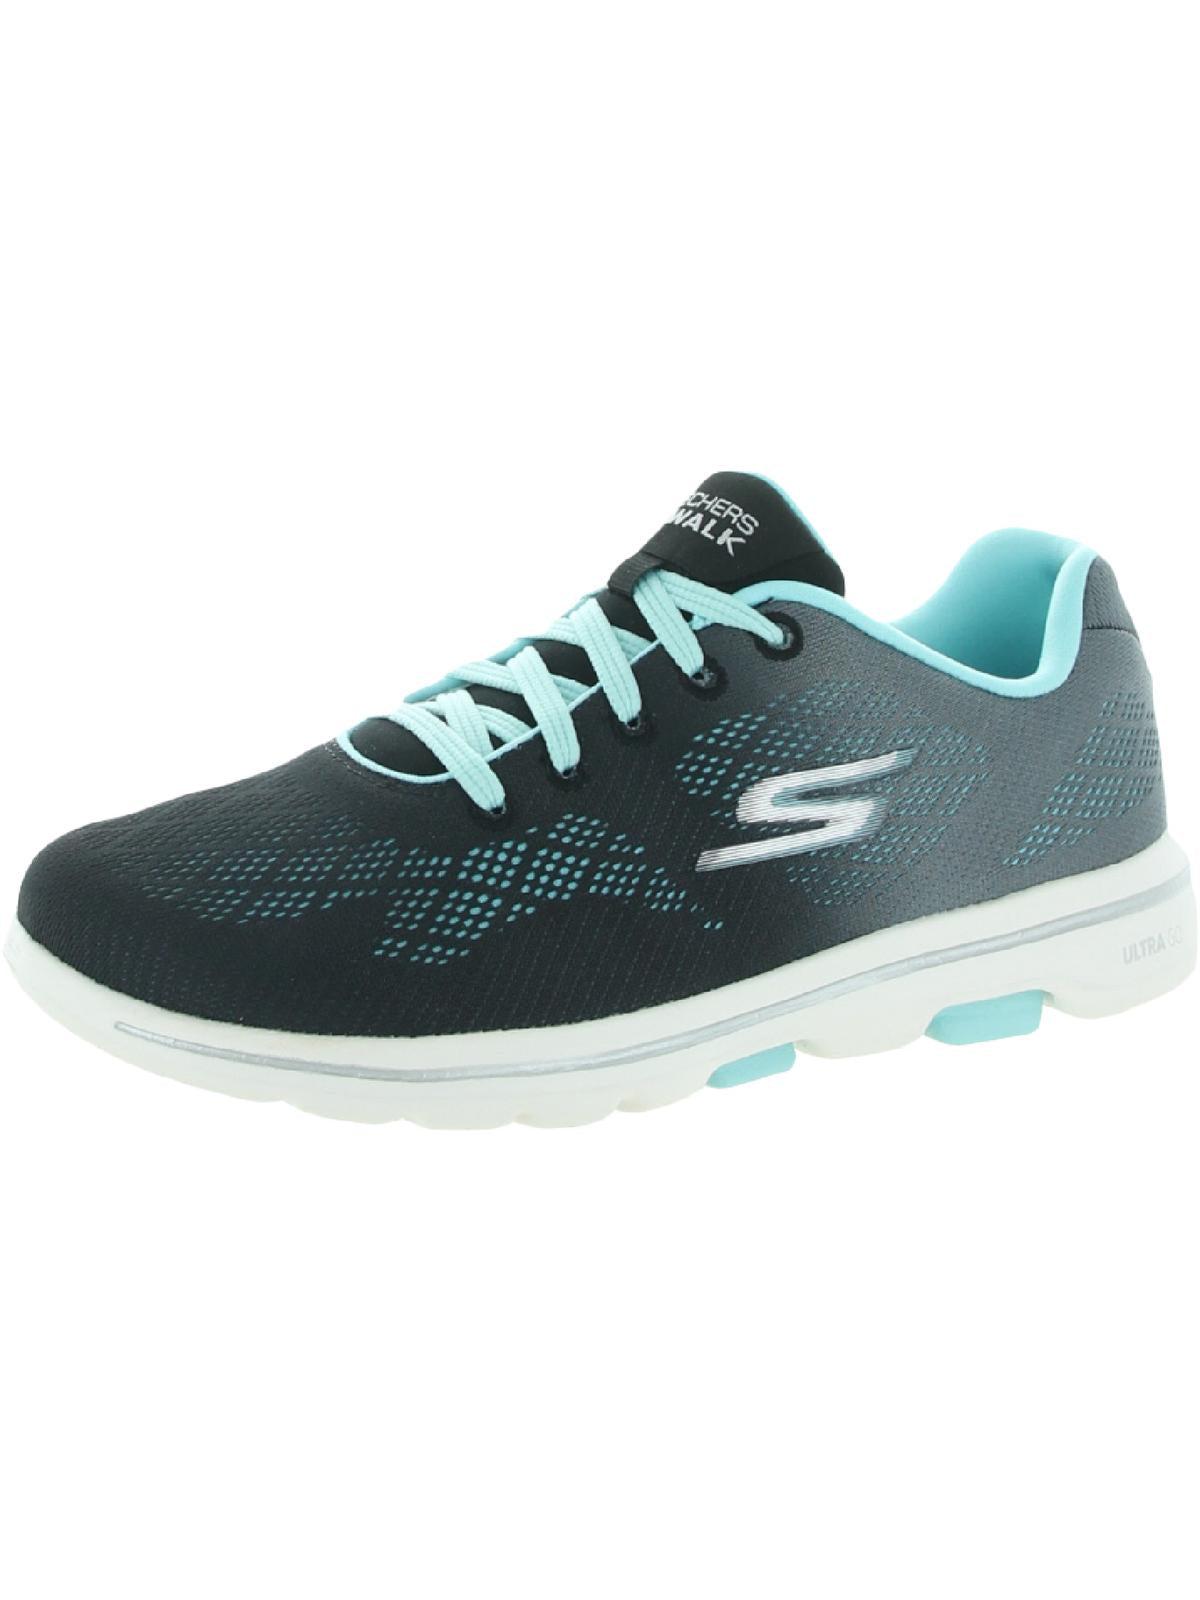 Skechers Go Walk 5 Alive Performance Trainers Running Shoes in Blue | Lyst